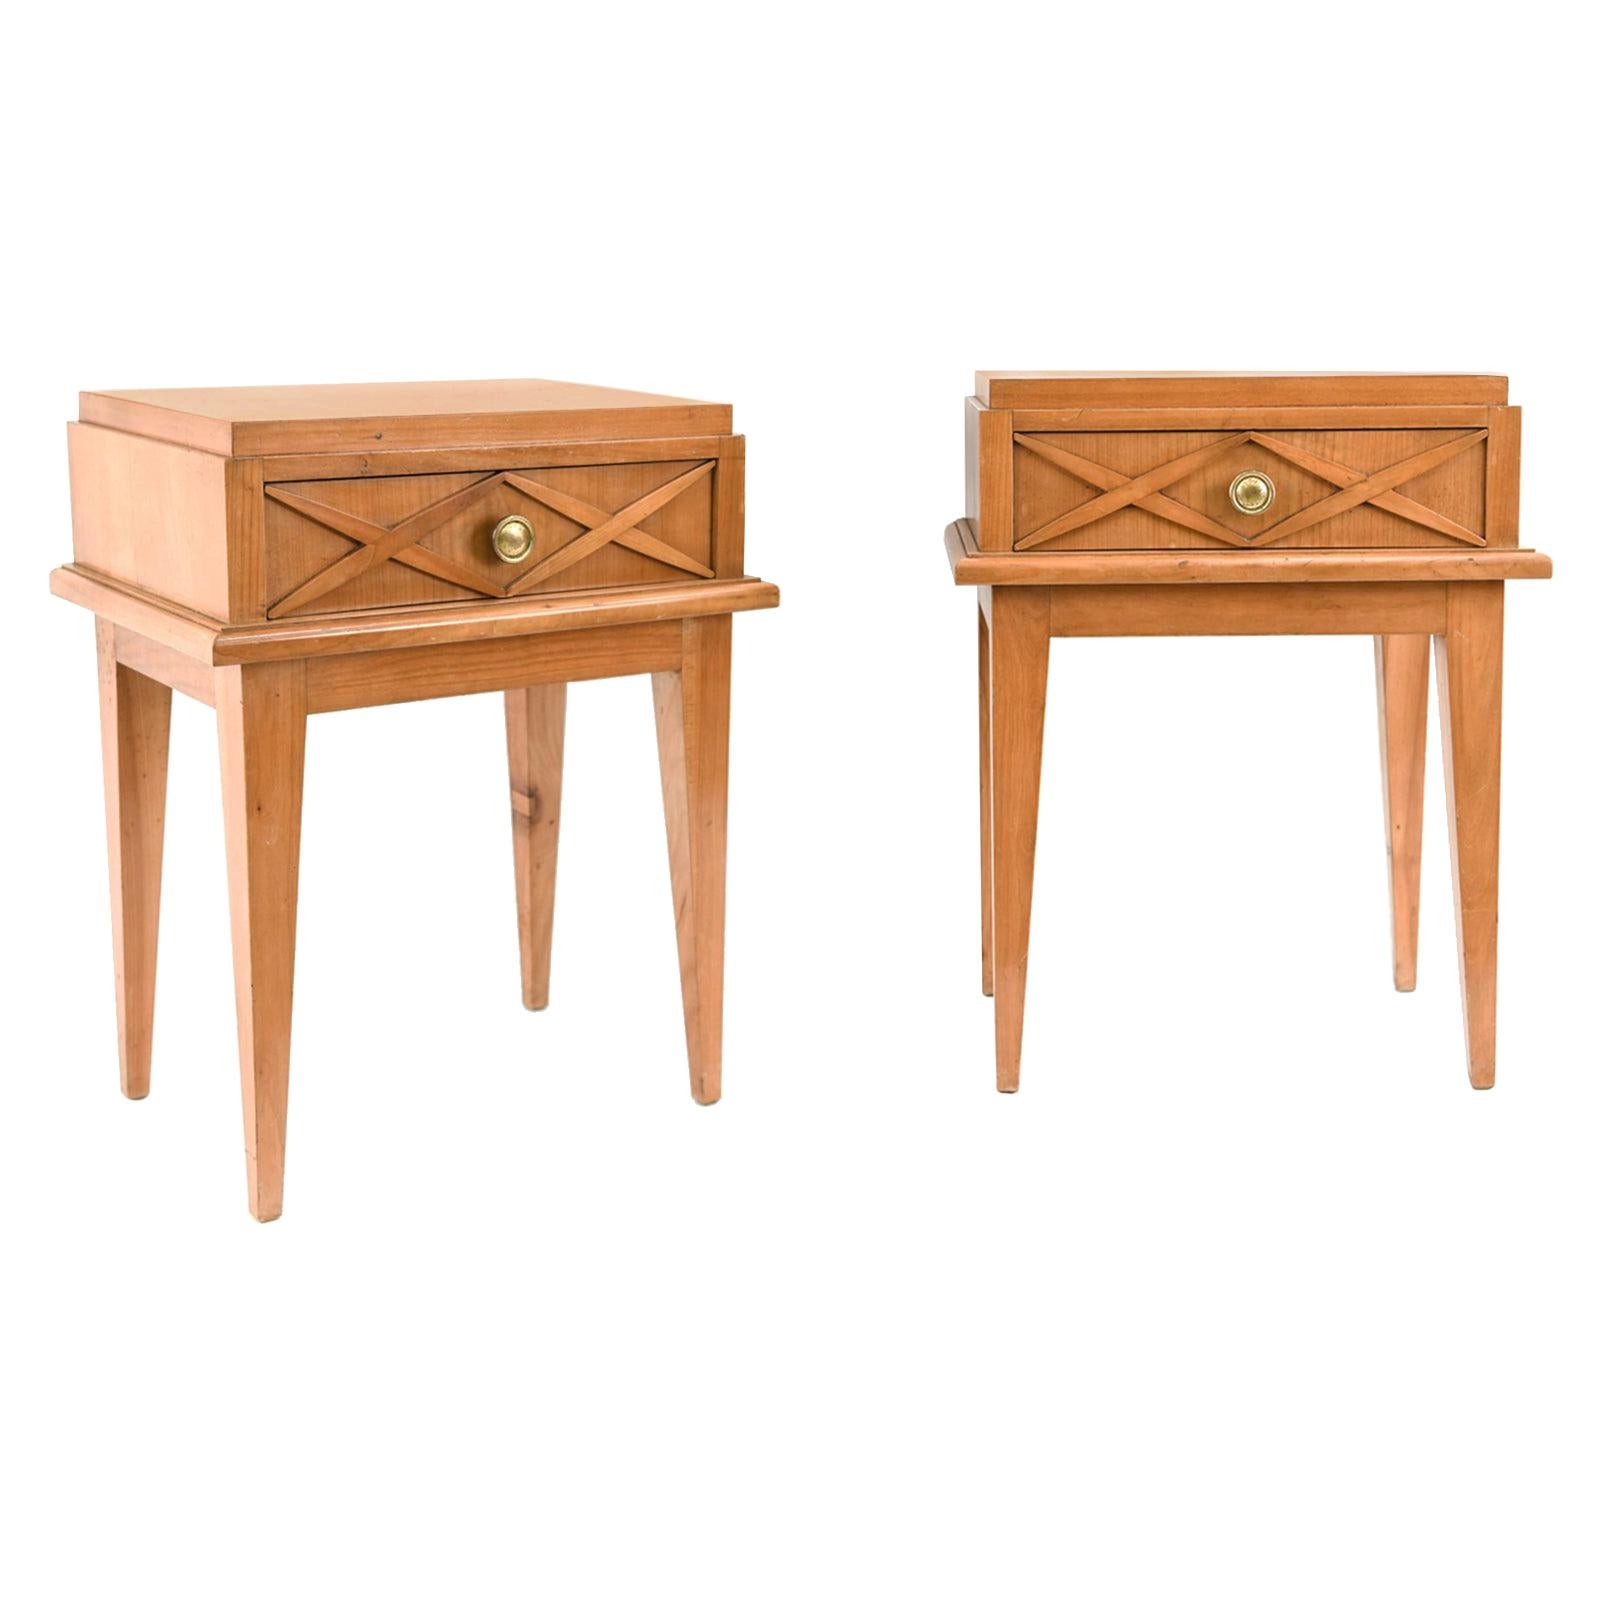 Pair of Midcentury Side Tables in the Style of Maison Gouffé, Paris